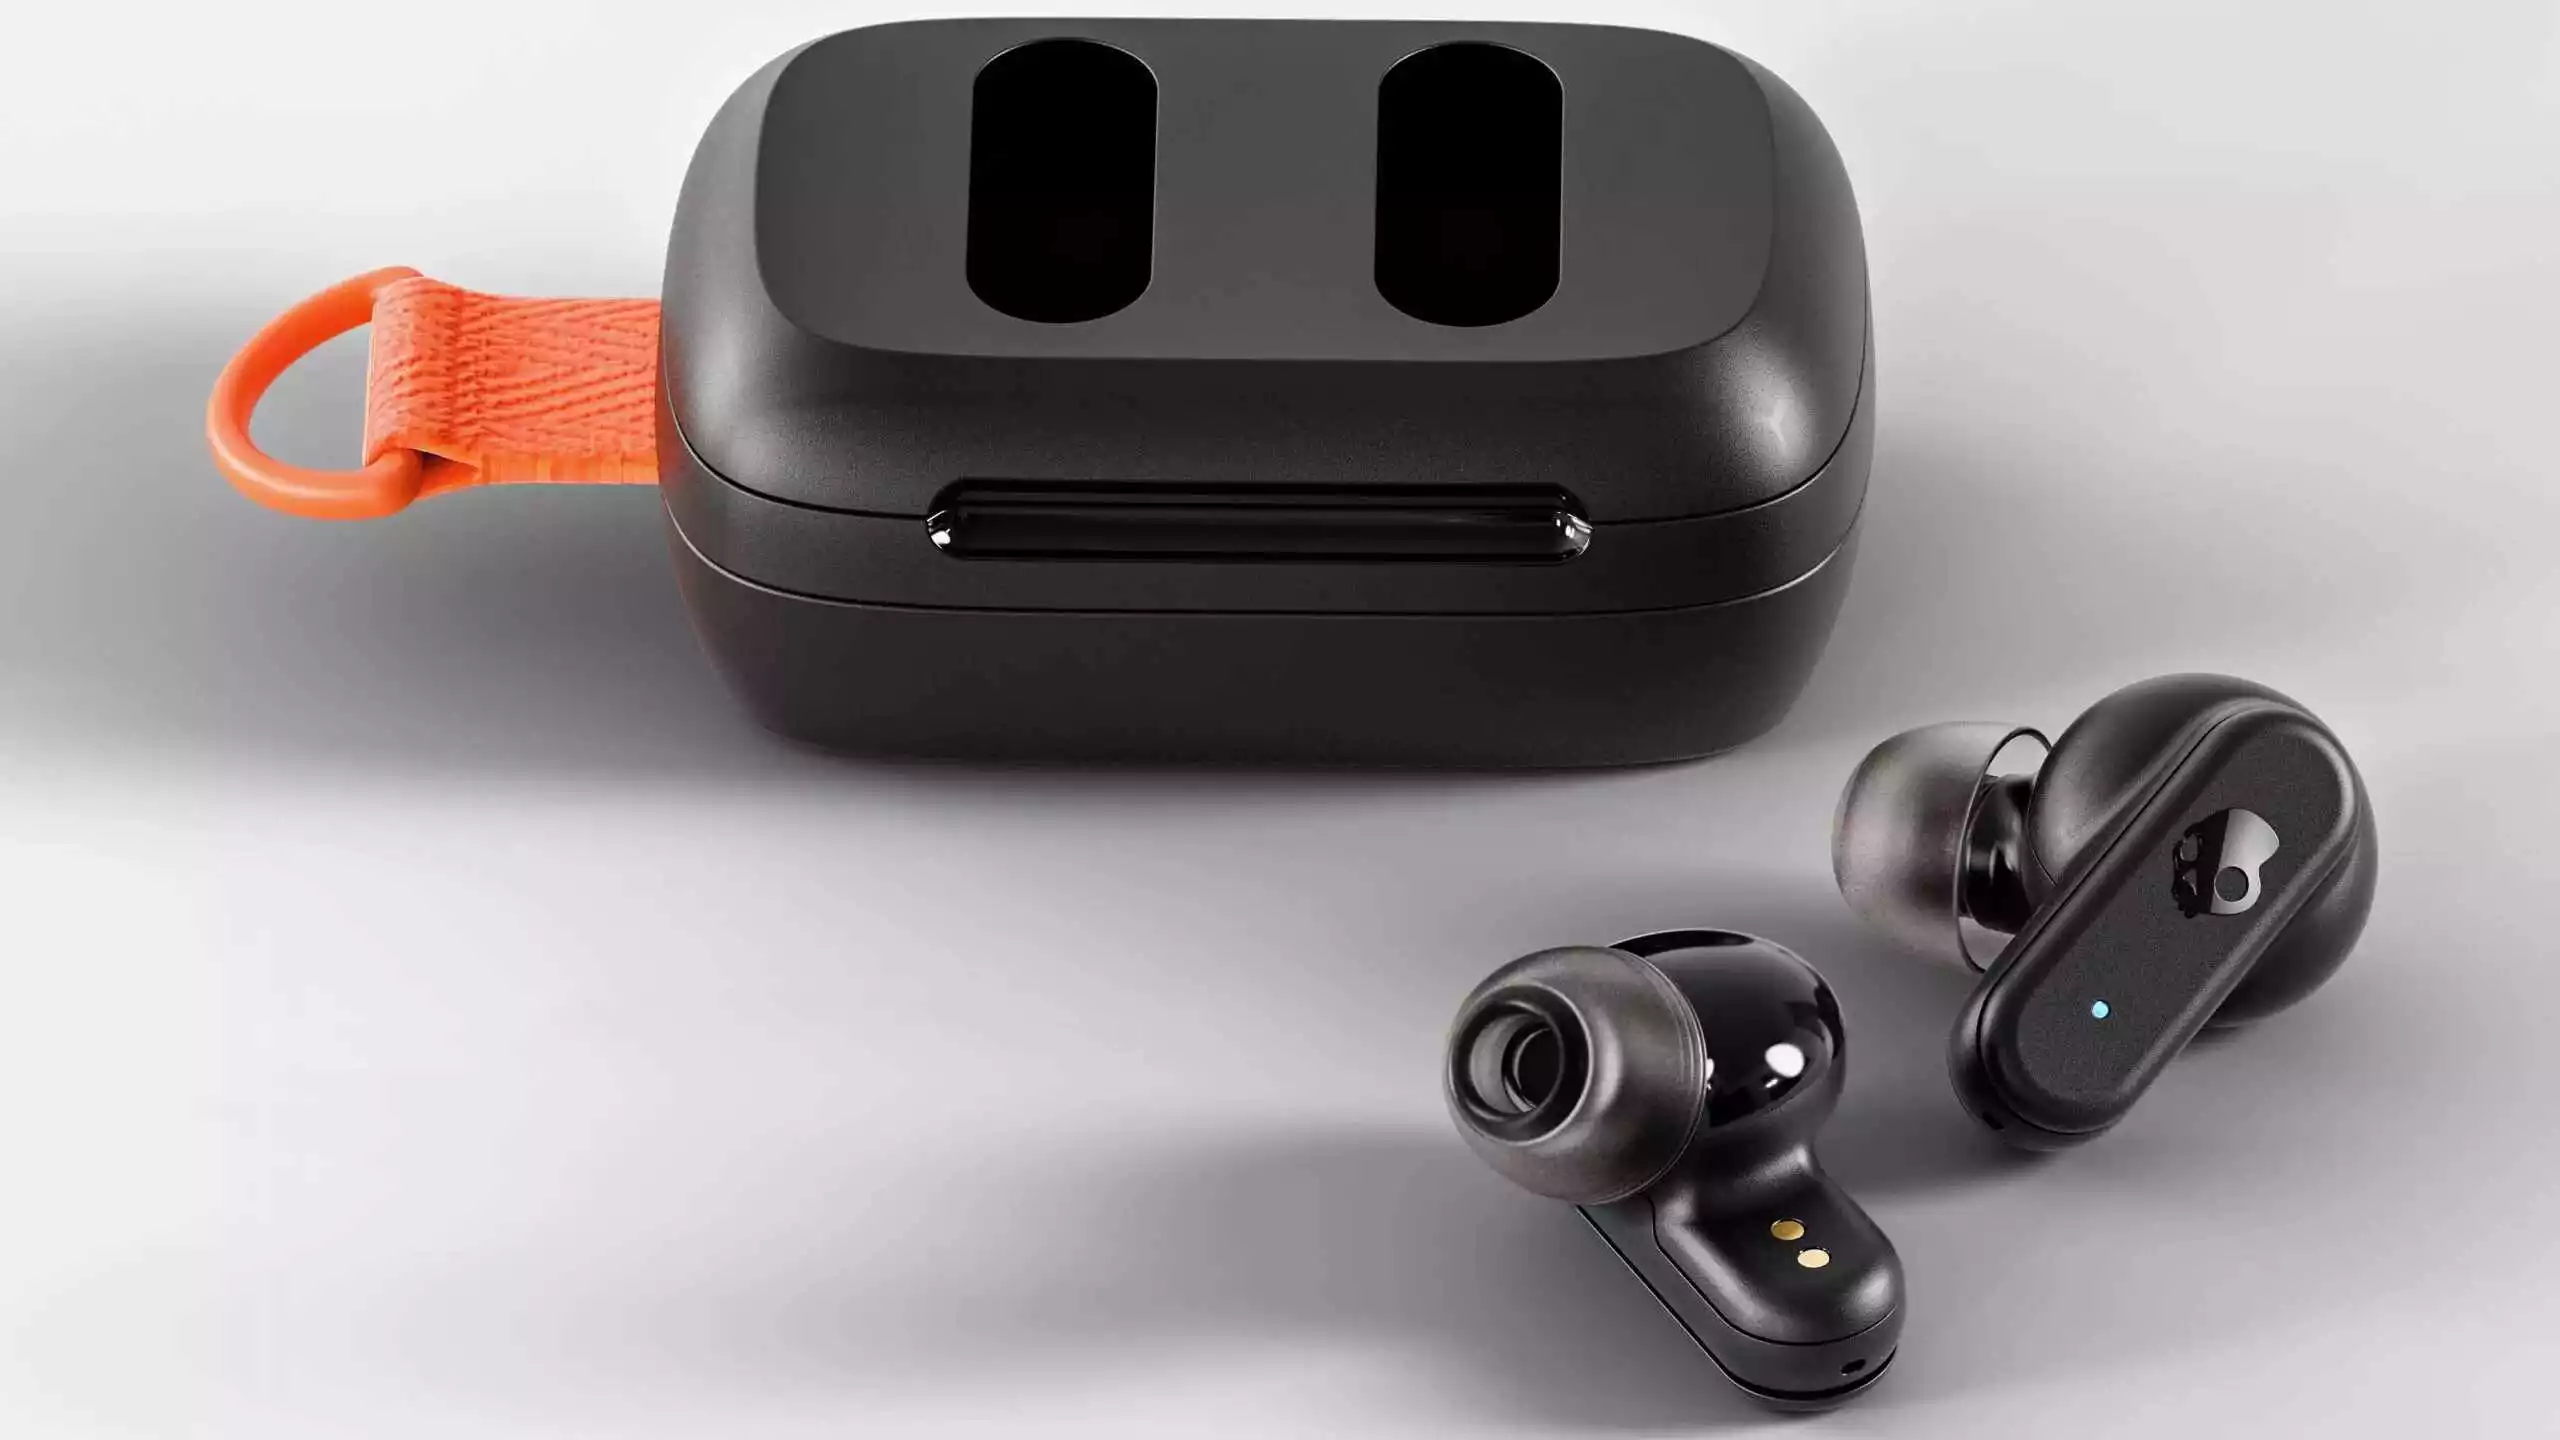 Skullcandy Dime 3 Wireless Earbuds Review